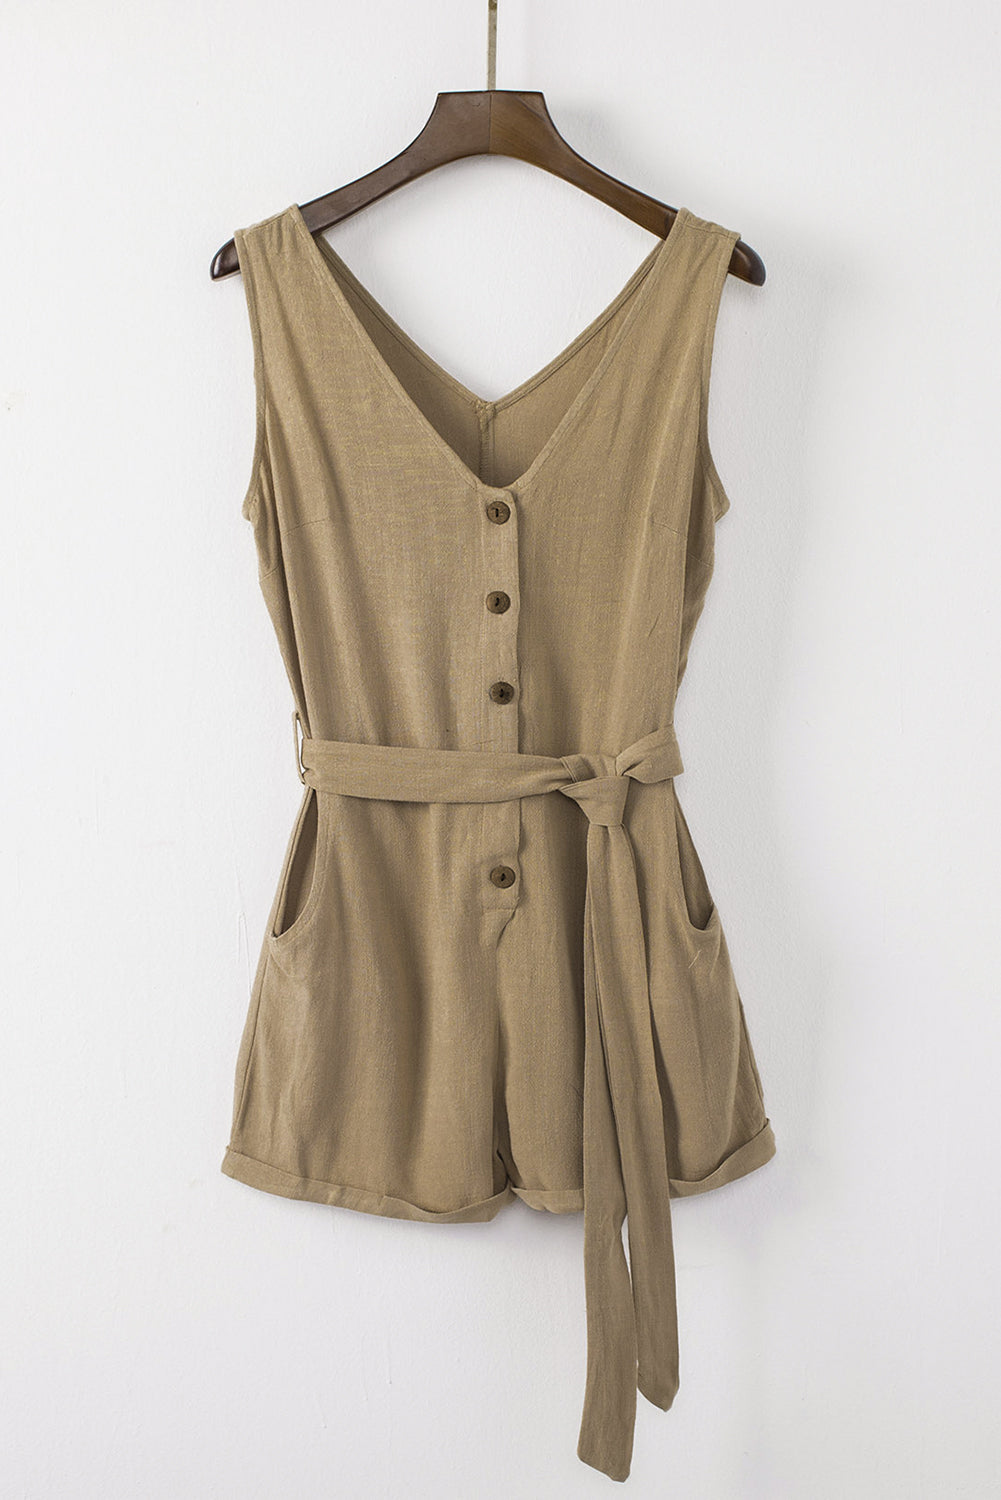 Sophisticated Safari Tie-Waist Buttoned Plunge Sleeveless Romper Small-2XL